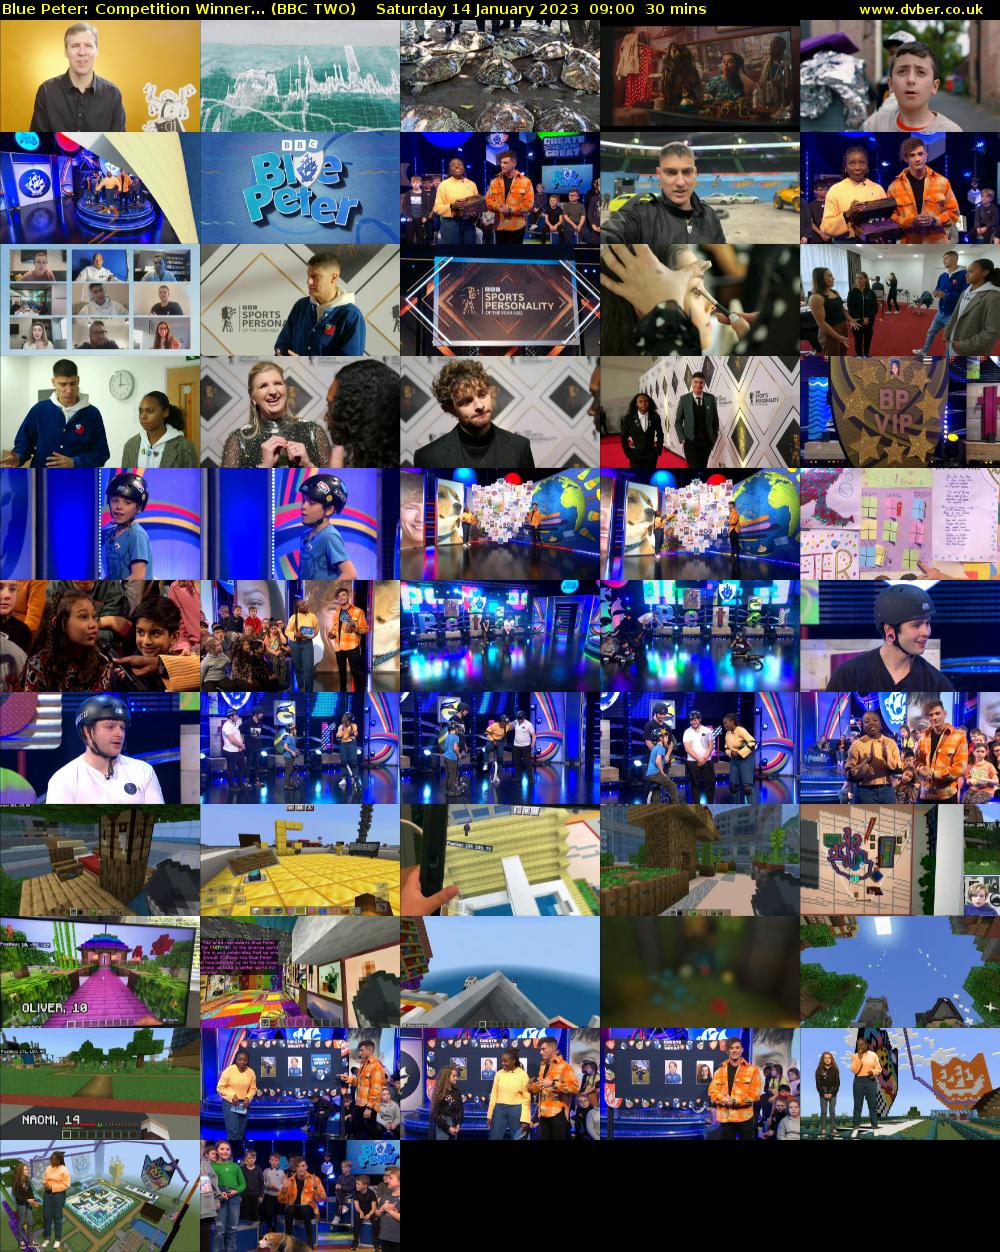 Blue Peter: Competition Winner... (BBC TWO) Saturday 14 January 2023 09:00 - 09:30